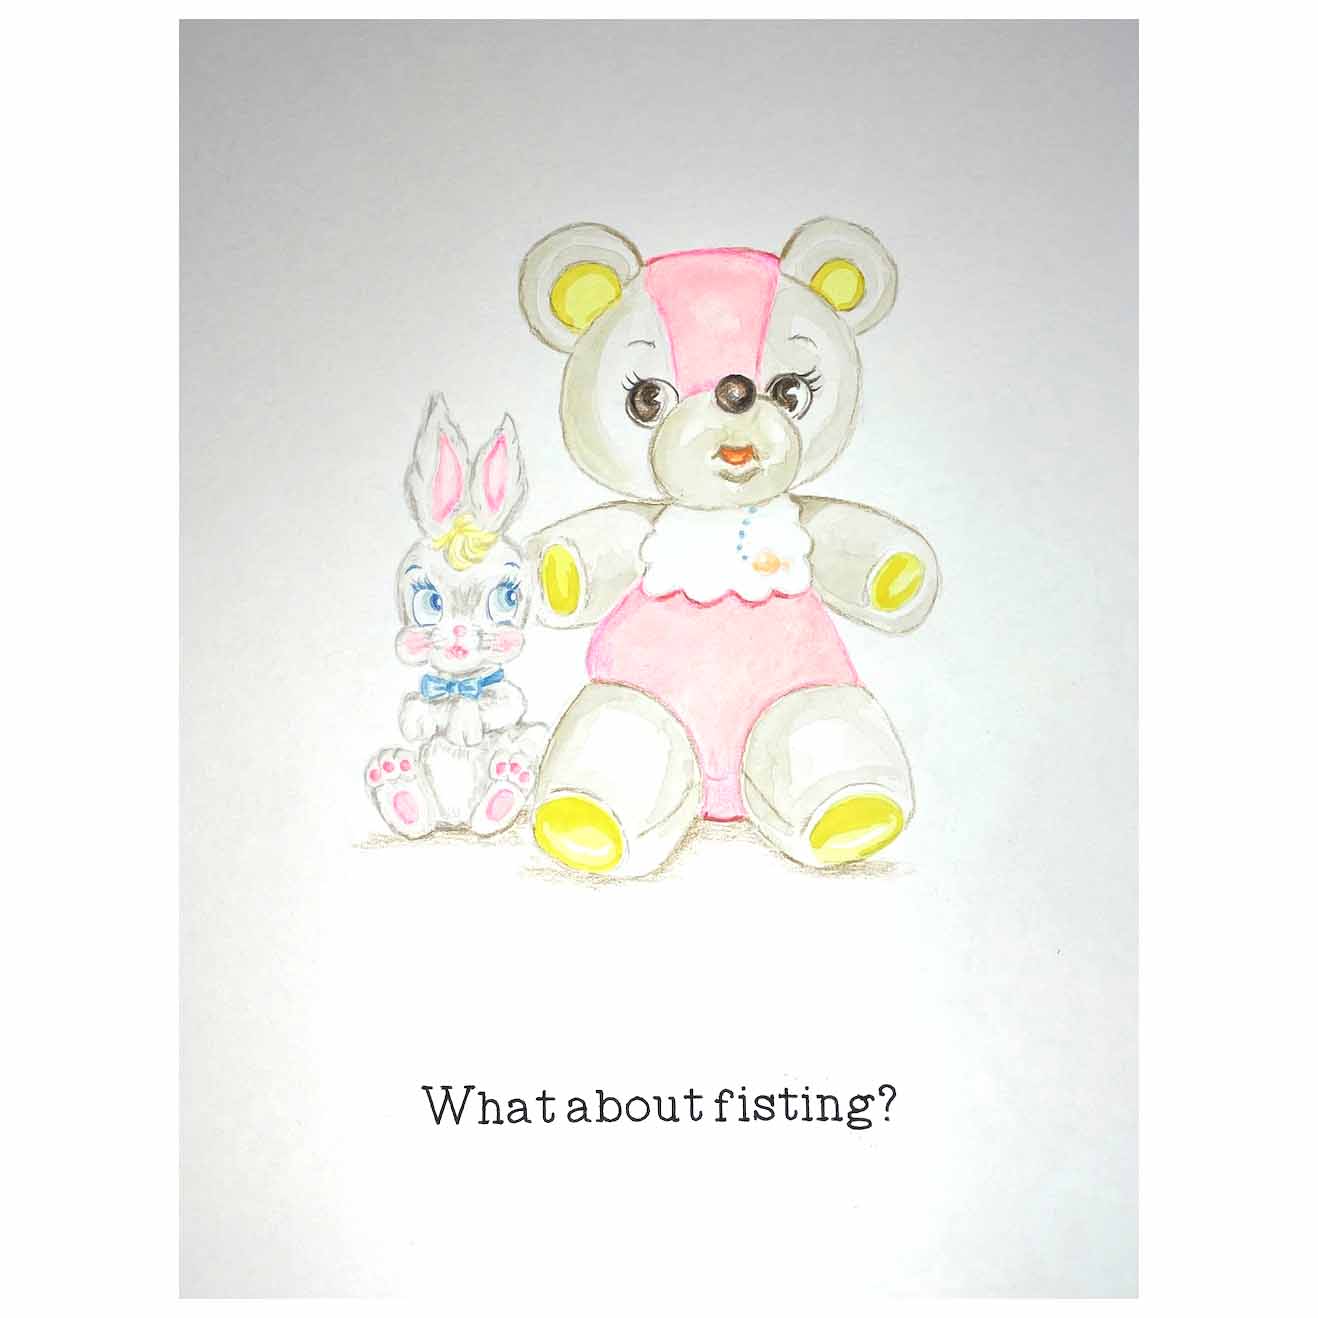 drawing of two stuffed plush animals reading "What about fisting?"